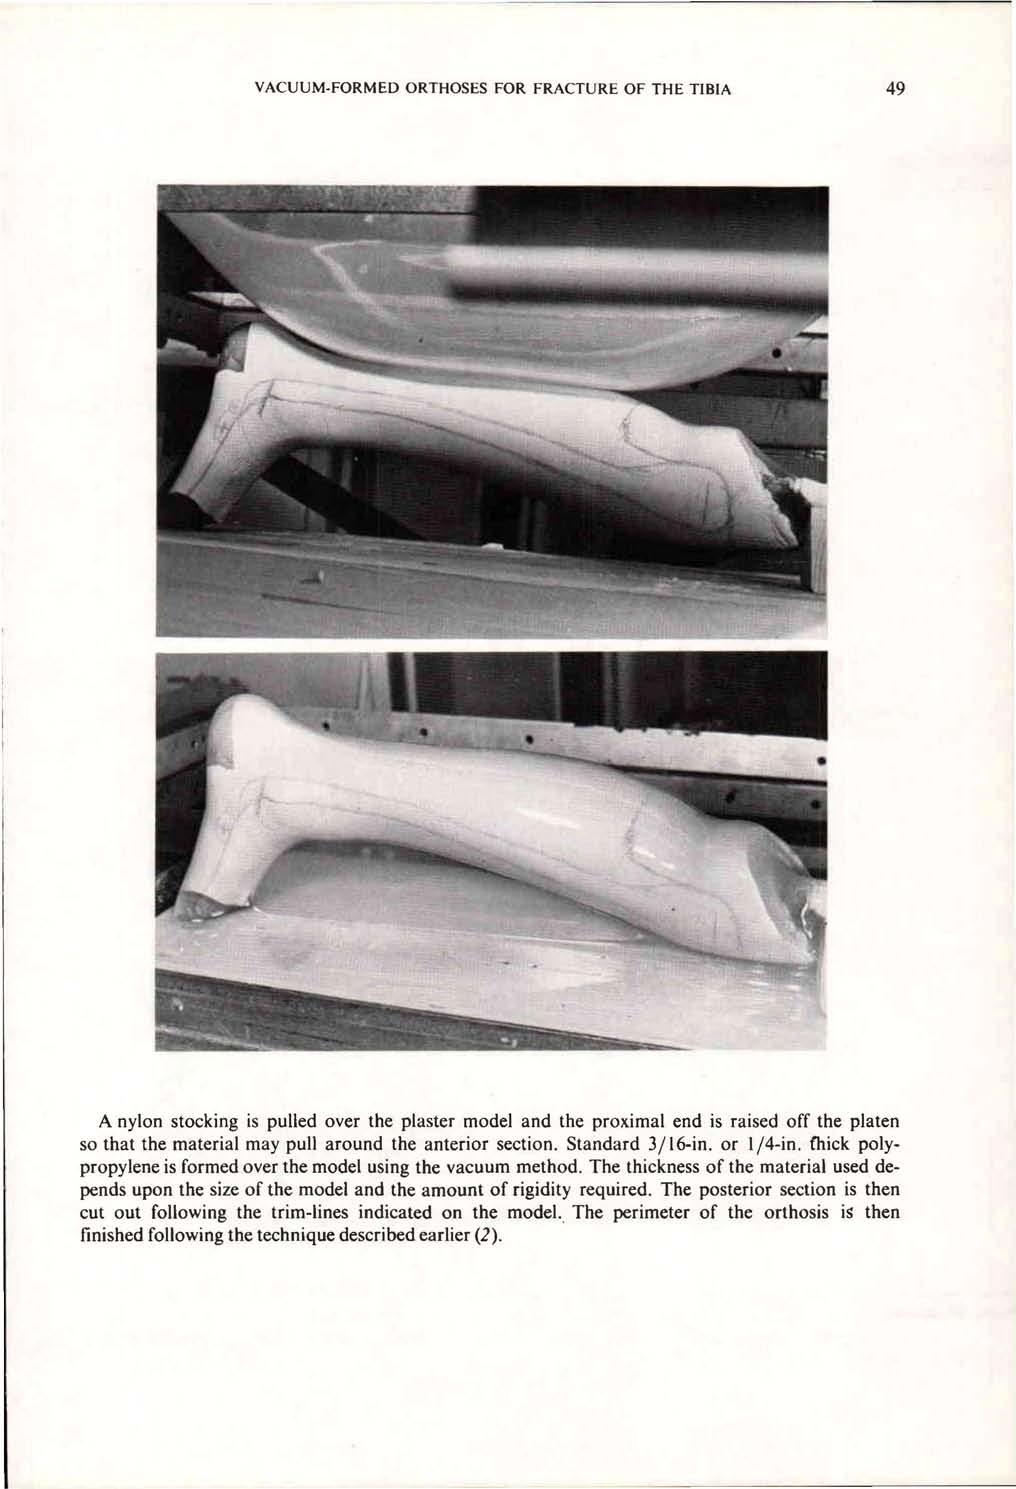 A nylon stocking is pulled over the plaster model and the proximal end is raised off the platen so that the material may pull around the anterior section. Standard 3/16-in. or 1/4-in.